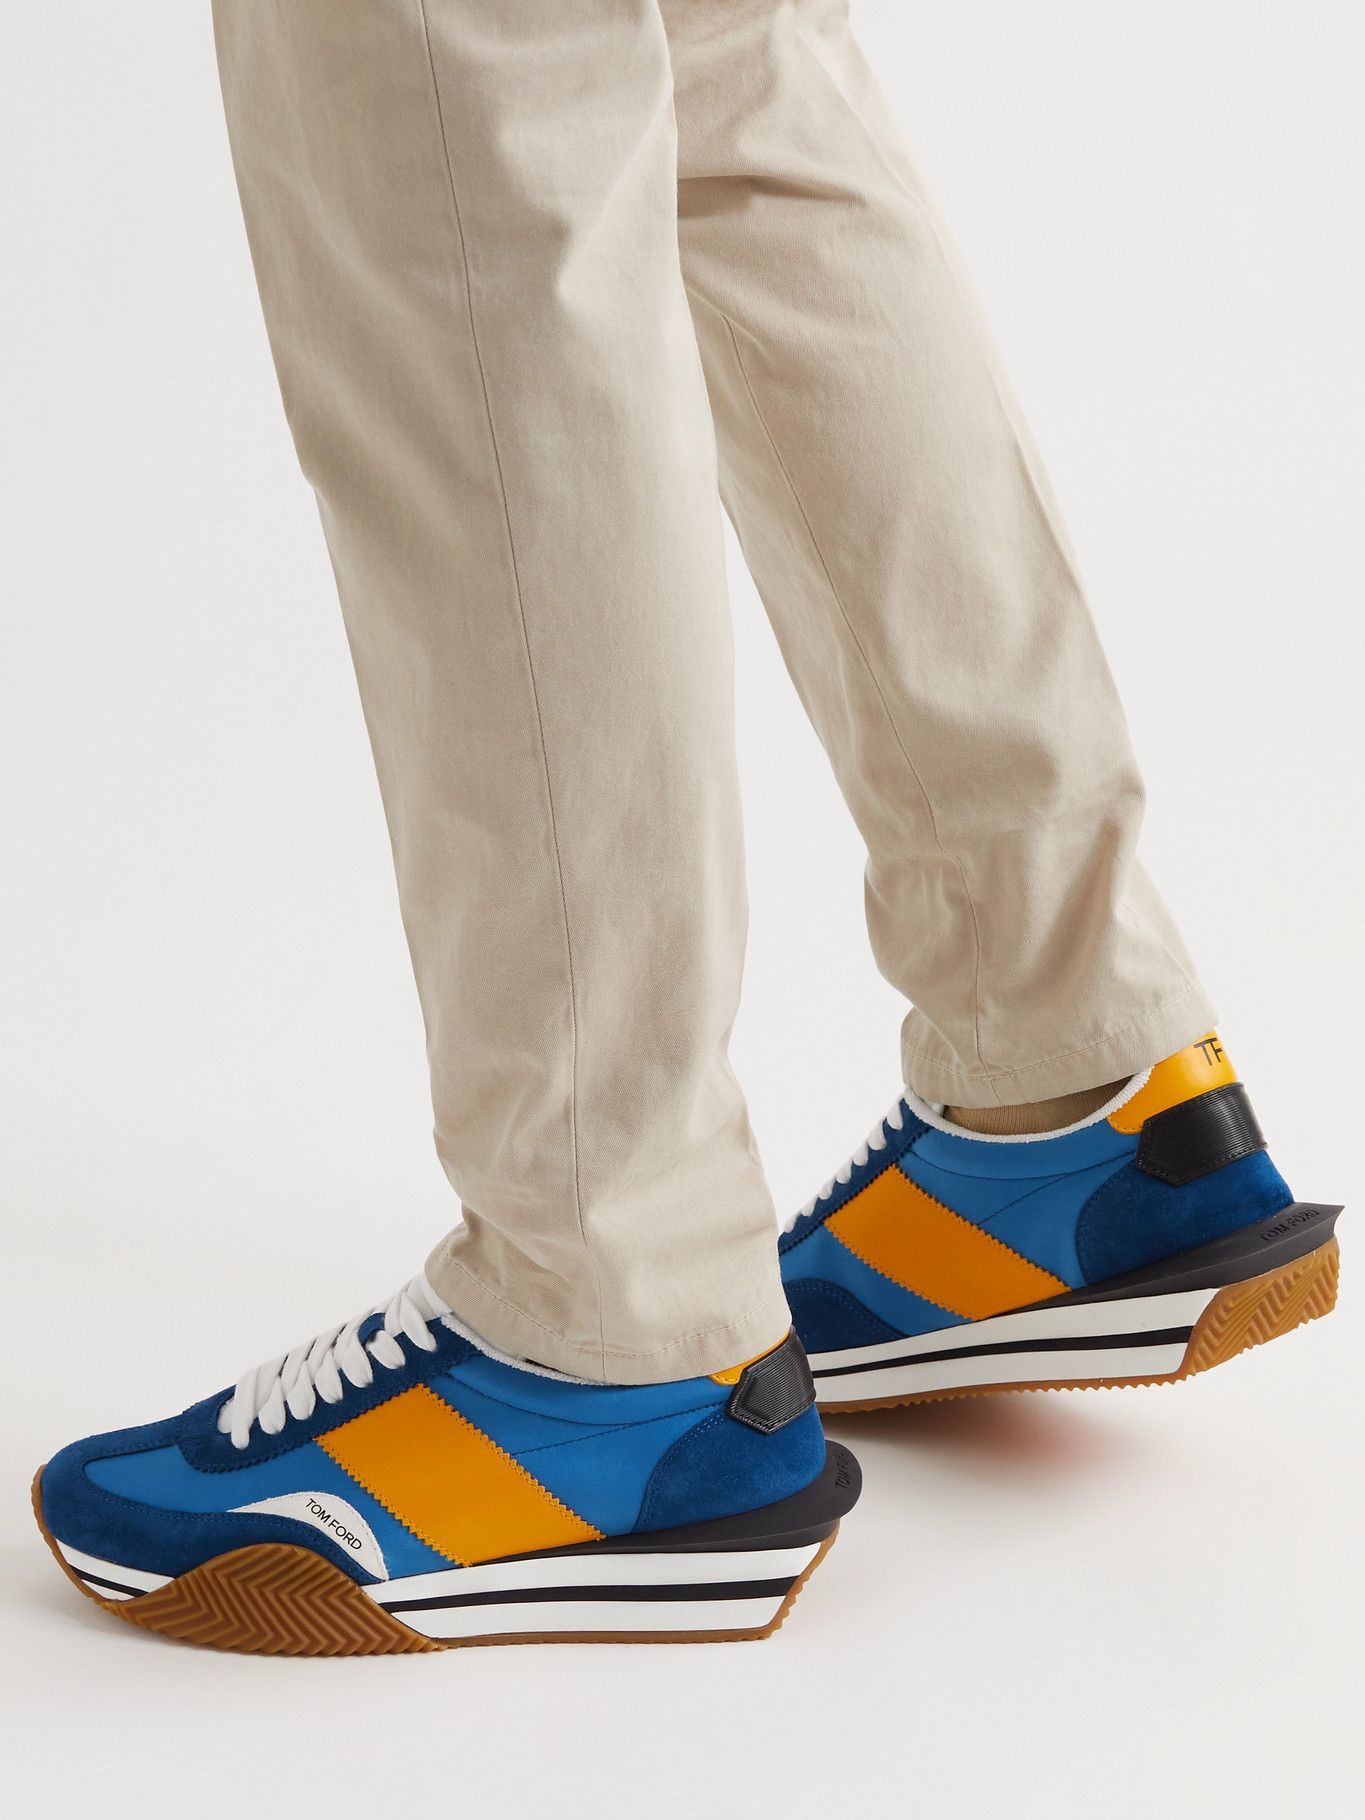 TOM FORD - James Rubber-Trimmed Leather, Suede and Nylon Sneakers - Blue TOM  FORD